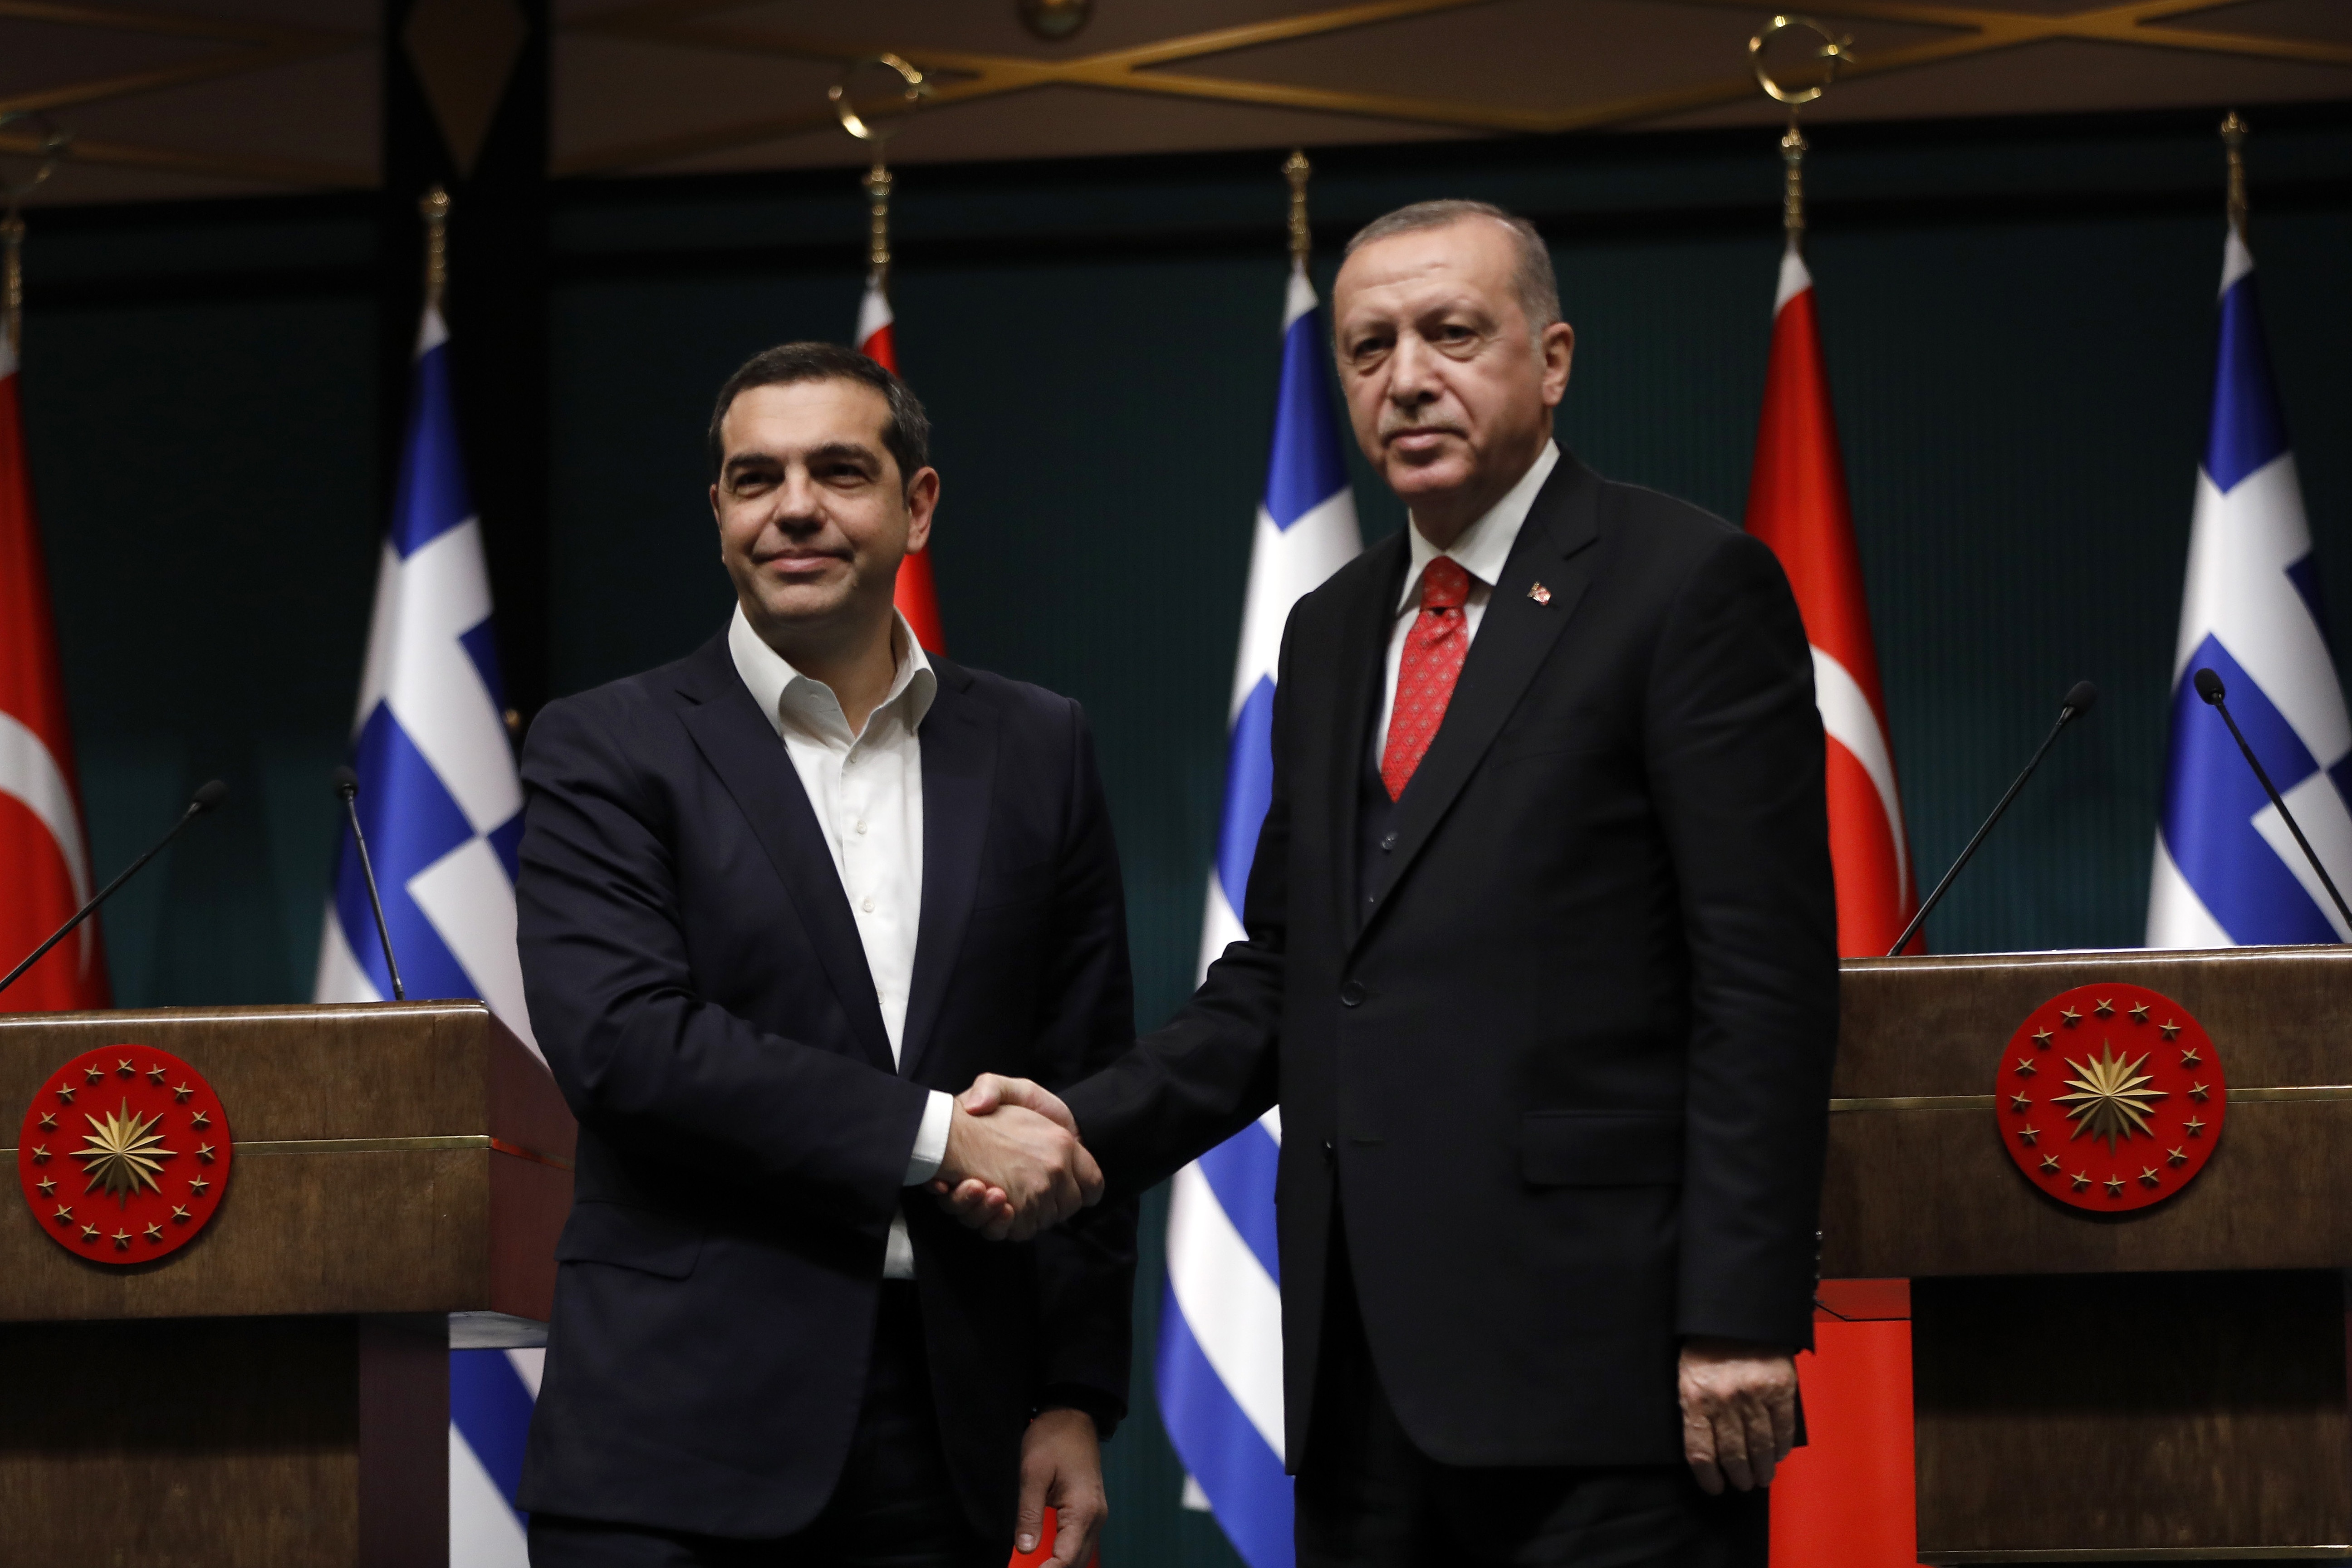 Turkey's President Recep Tayyip Erdogan, right, and Greece's Prime Minister Alexis Tsipras shake hands after their press conference at the Presidential Palace in Ankara, Tuesday, Feb. 5, 2019. Tsipras and Erdogan are set to discuss an array of subjects that have strained relations between the two NATO allies, including territorial disputes in the Aegean Sea and gas exploration in the eastern Mediterranean. (AP Photo/Burhan Ozbilici)